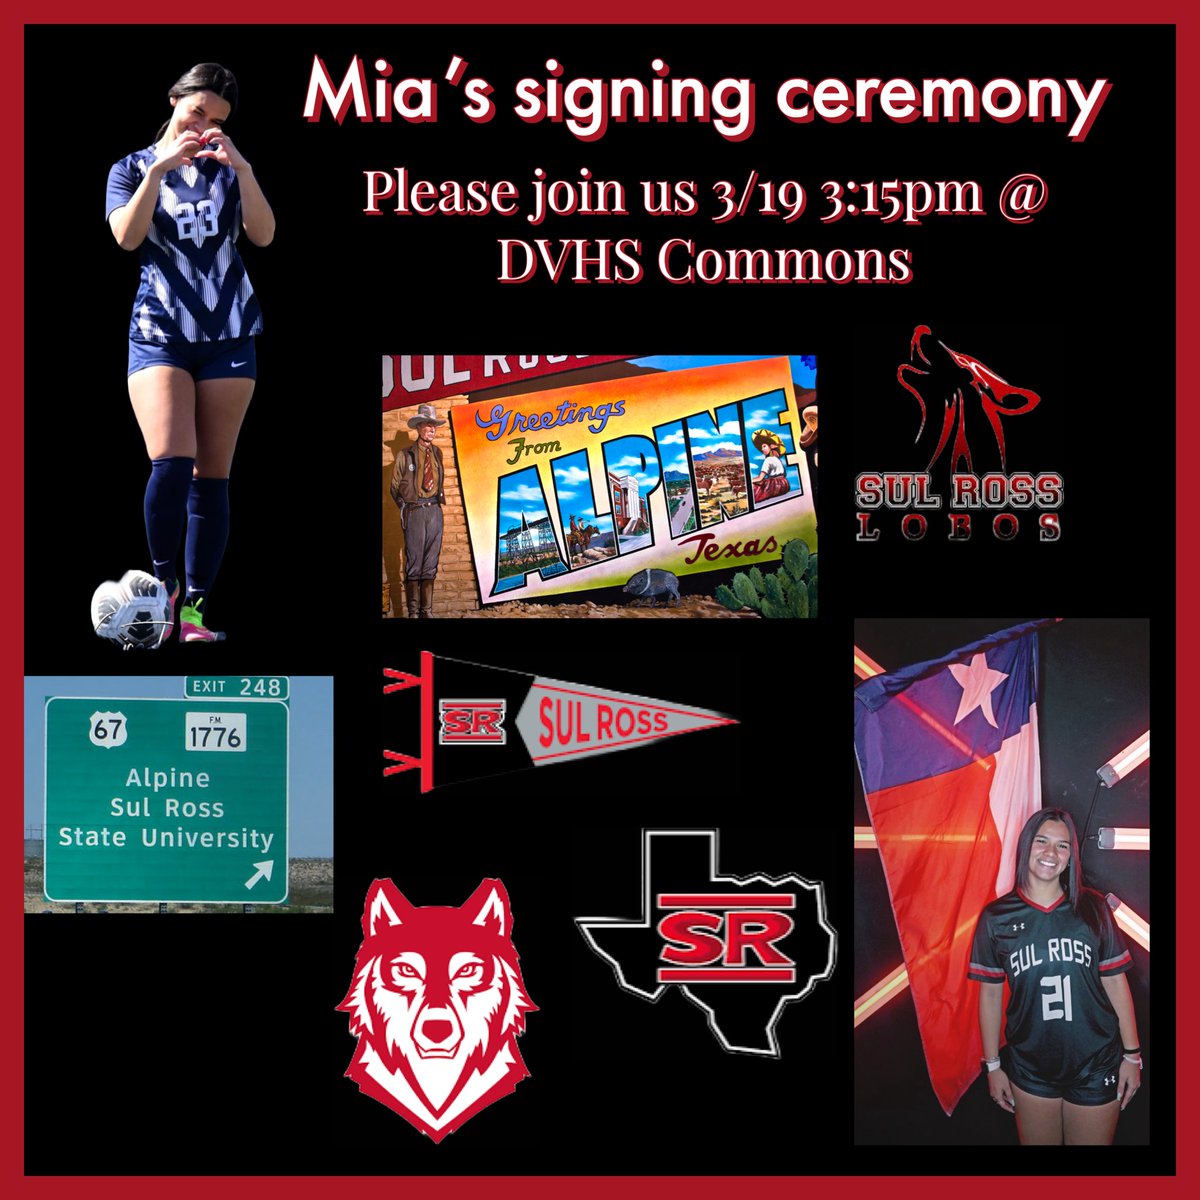 If you’re in the area please join me on this big day as I sign my letter of intent to attend Sul Ross State University. @Prep1USA @epcosmosfc @DVHSWSoccer @DVHSYISD @Fchavezeptimes @srsuwsoccer @CoachDominguez7